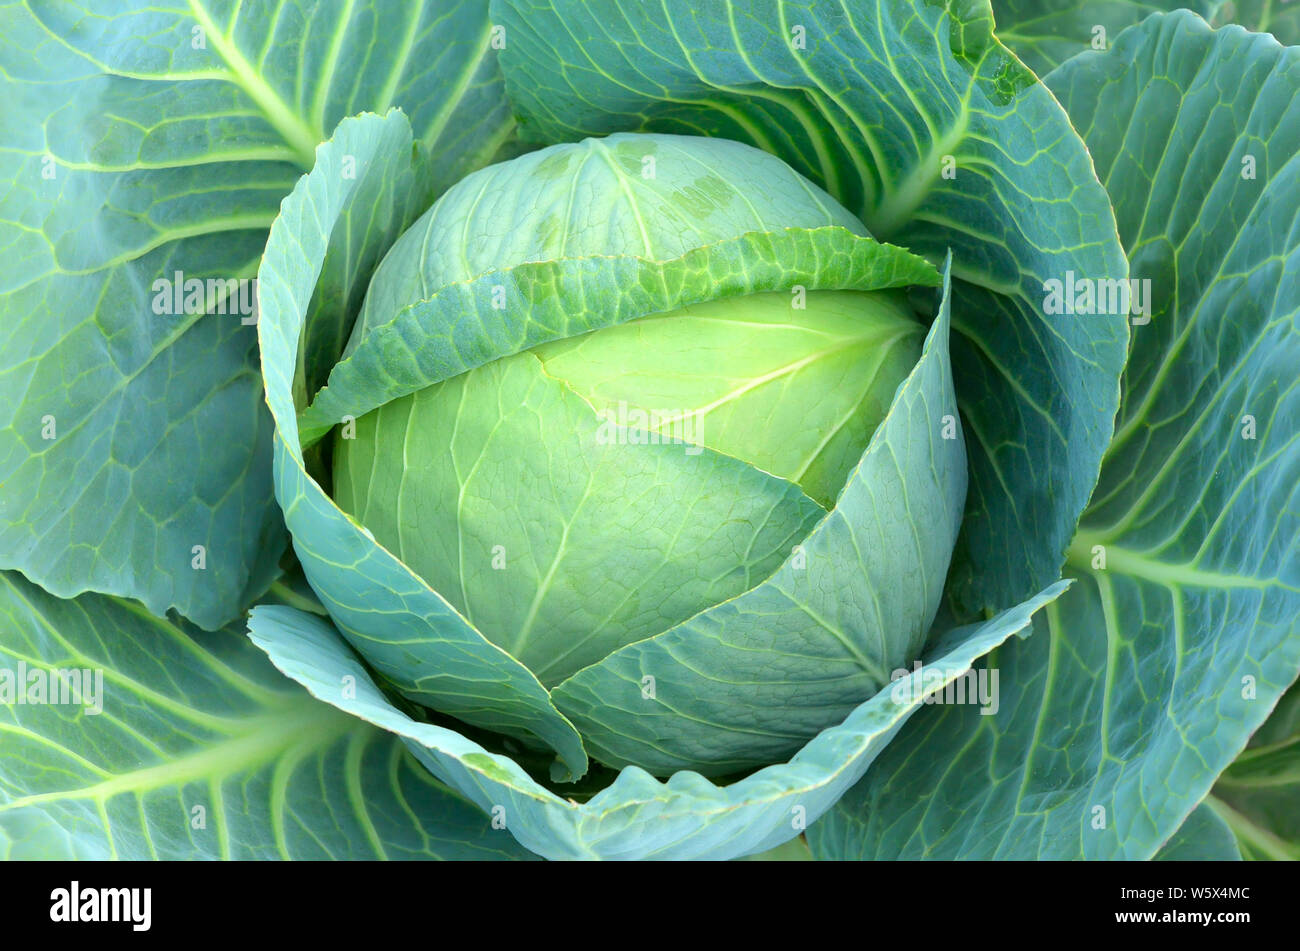 Cabbage (Brassica oleracea) plant growing in a garden Stock Photo